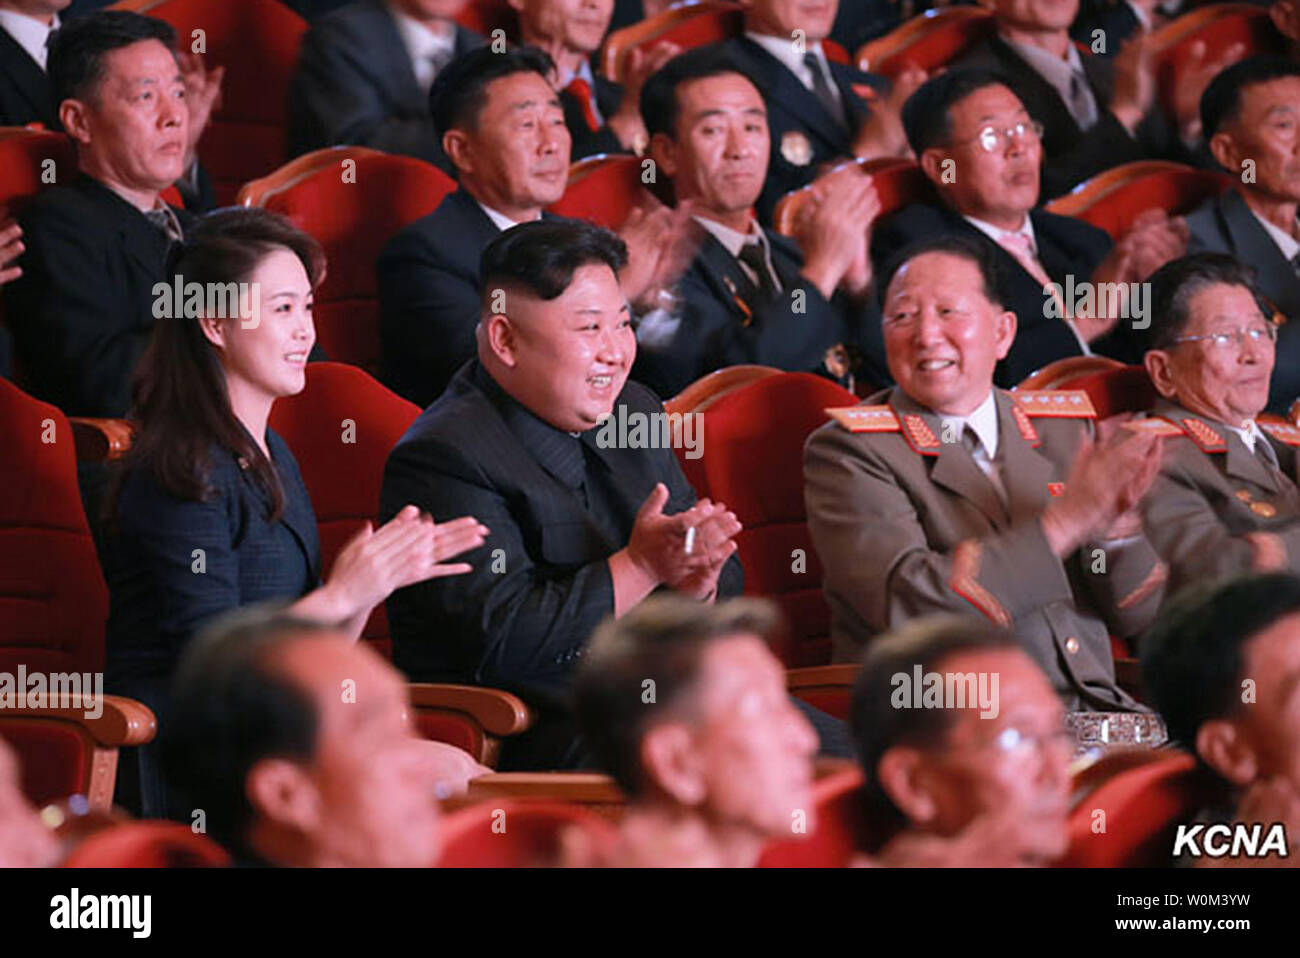 North Korean leader Kim Jong Un, accompanied by his wife, Ri Sol-Ju, hosted a lavish gala at the People's Theatre in Pyongyang on September 10, 2017, to celebrate last week's 'perfect success in the H-bomb test.' The evening's festivities began with a rendering of the National Anthem before performing 'Glory to General Kim Jong Un,' 'The Glorious Motherland,' and other traditional songs. Photo by KCNA/UPI Stock Photo